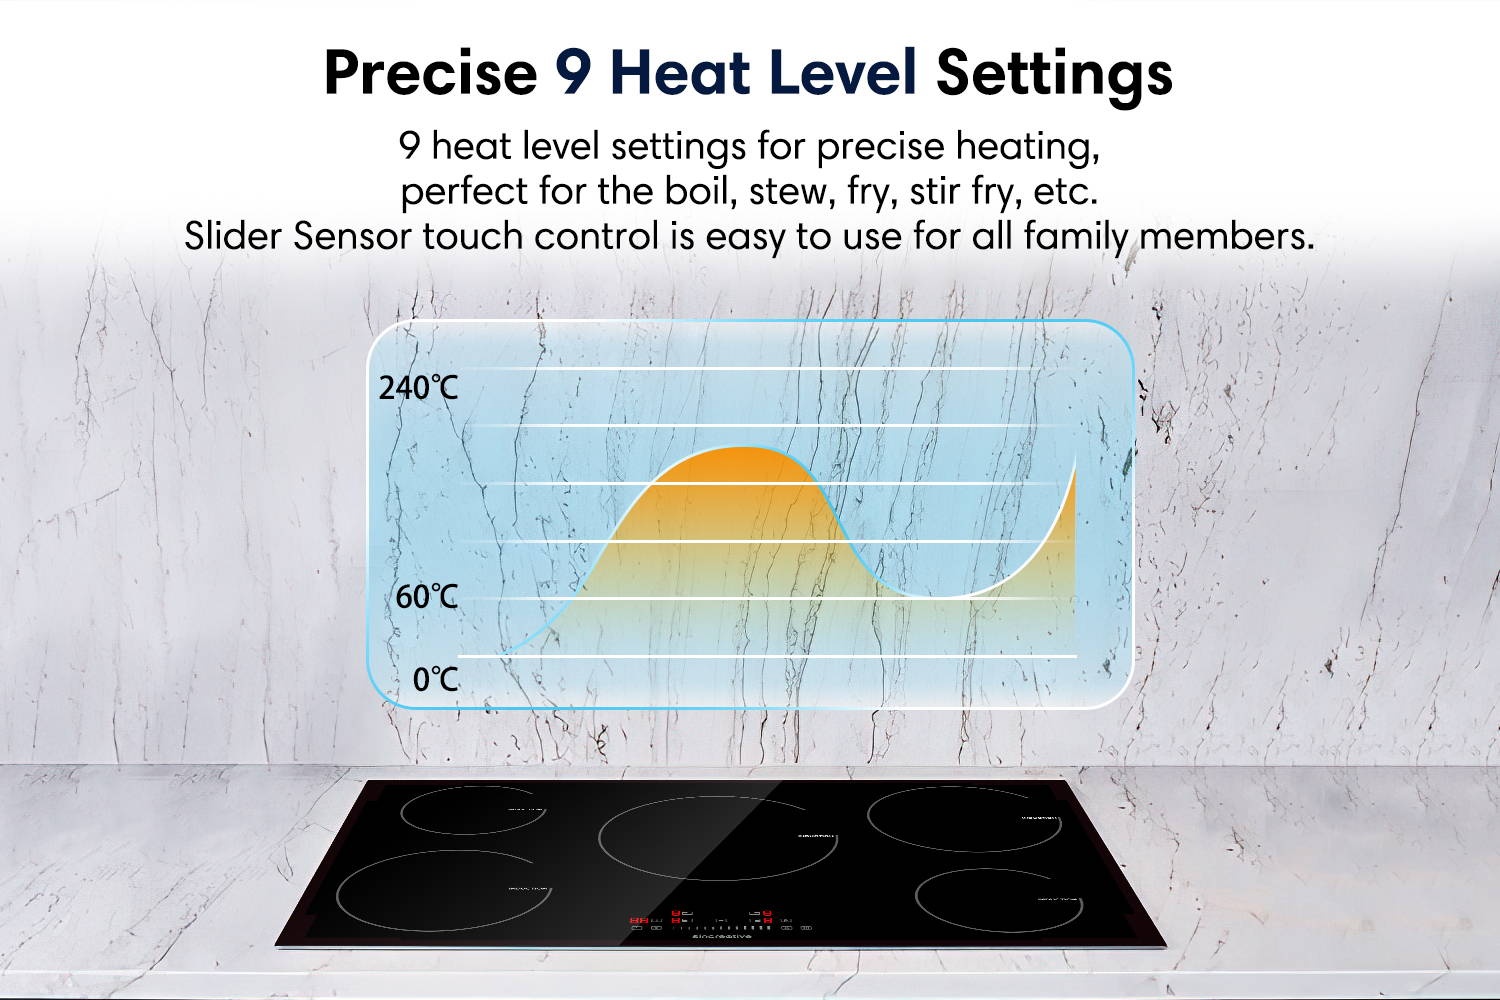 Precise 9 heat level settings. 9 heat level settings for precise heating, perfect for the boil, stew, fry, stir fry, etc. Slider Sensor touch control is easy to use for all family members.